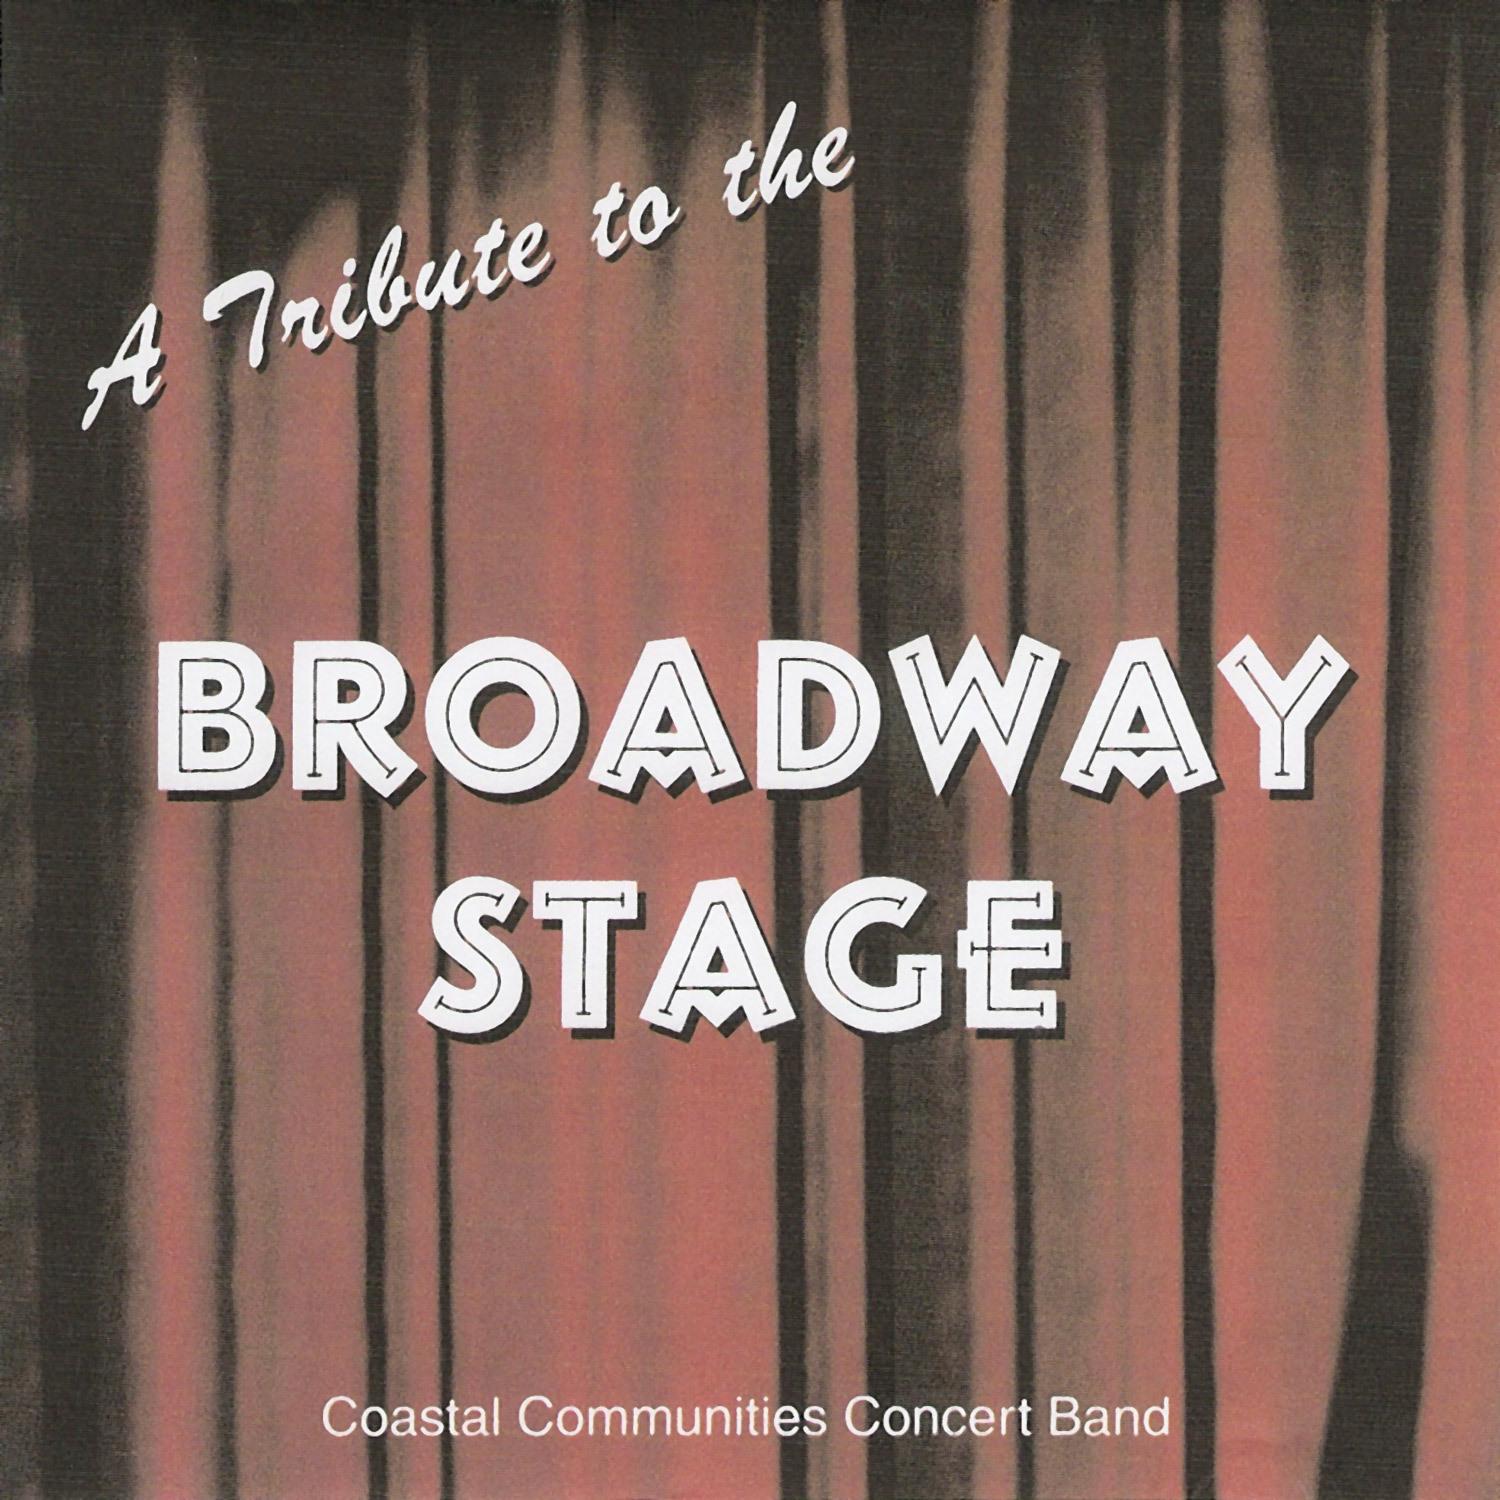 Coastal Communities Concert Band - Tribute to the Broadway Stage专辑